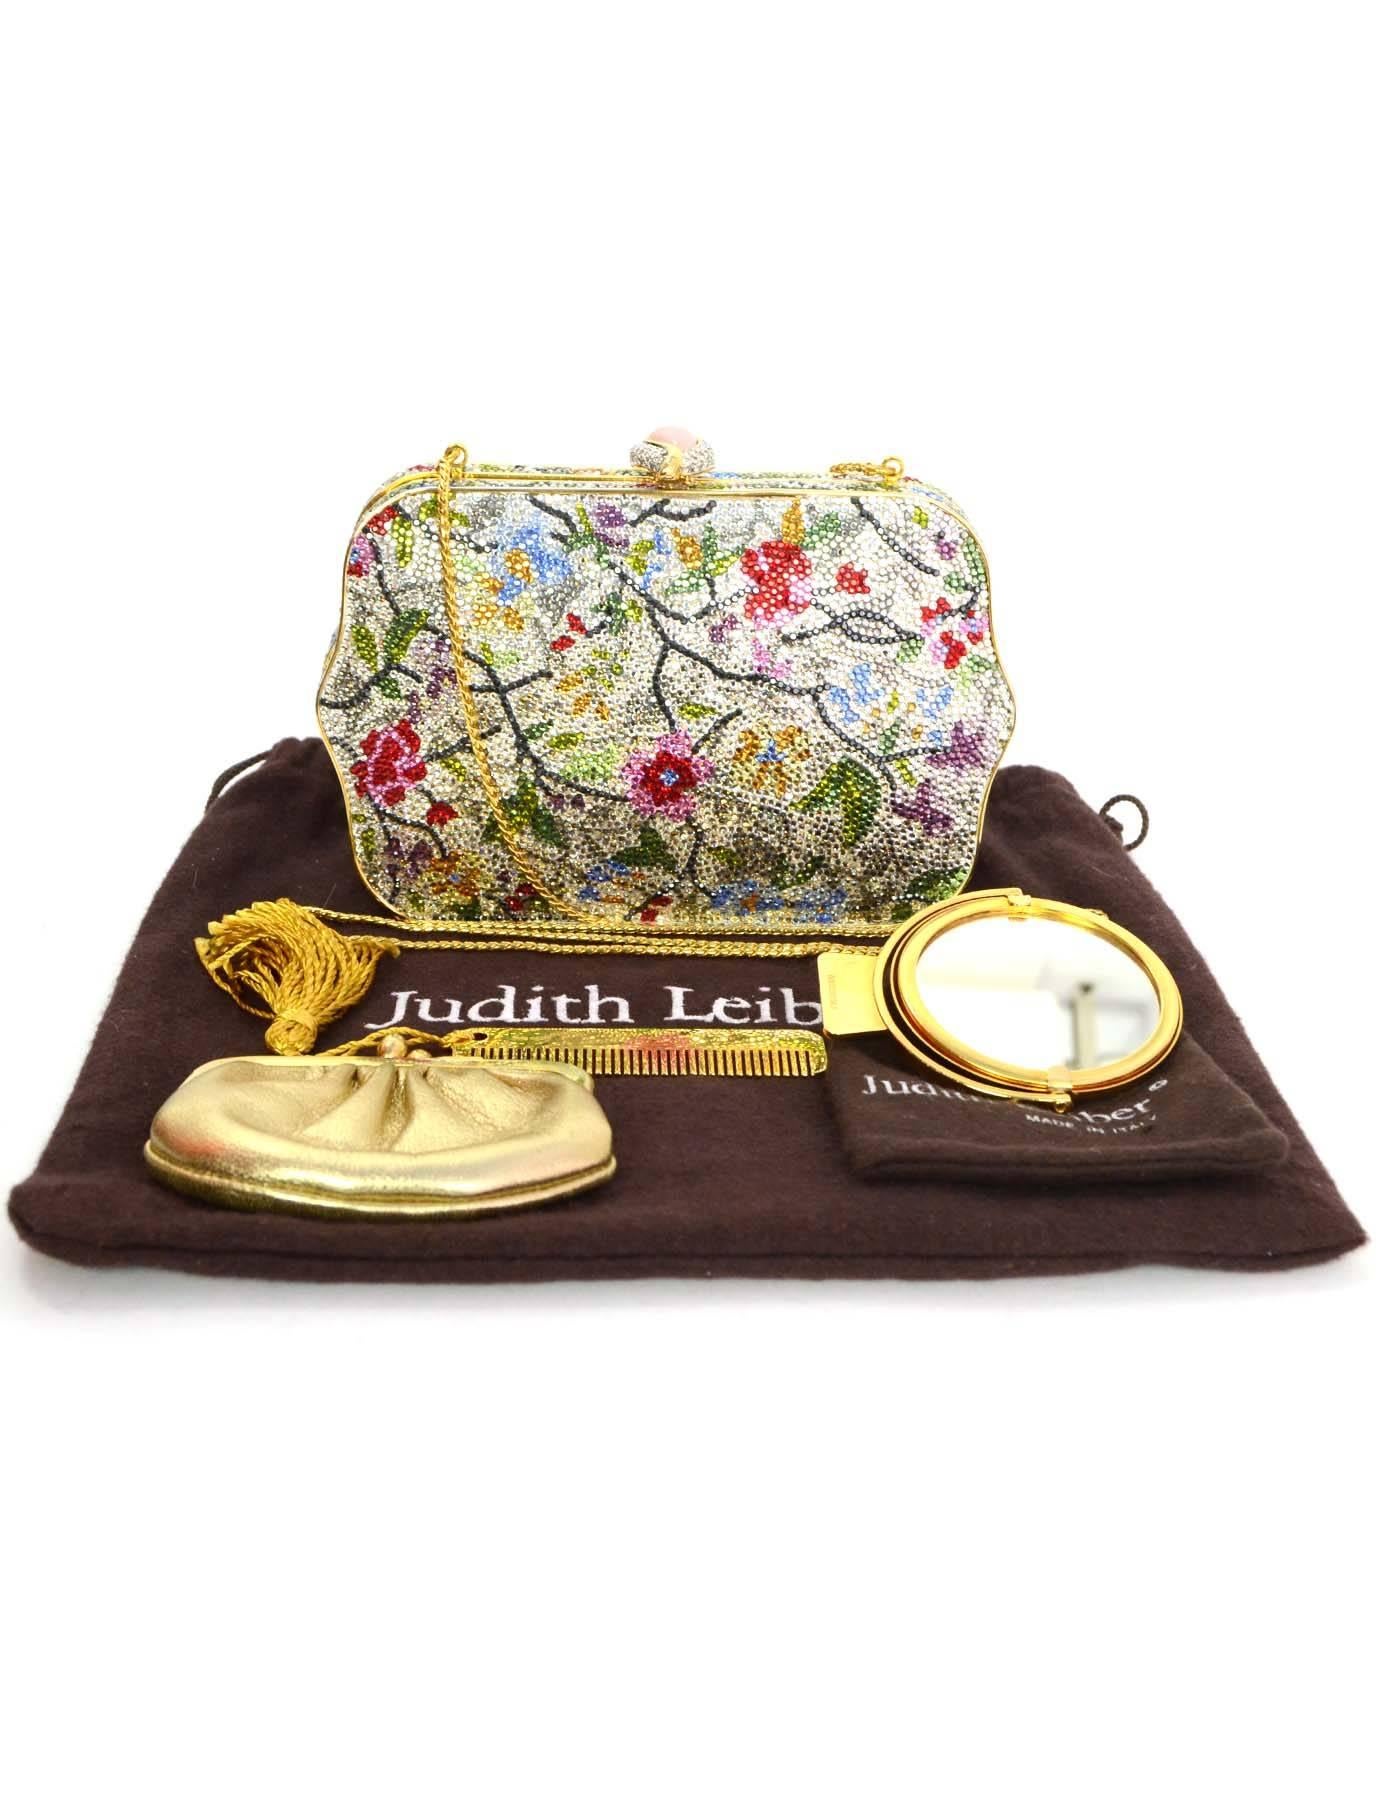 Women's Judith Leiber Multi-Colored Floral Crystal Embellished Minaudiere GHW